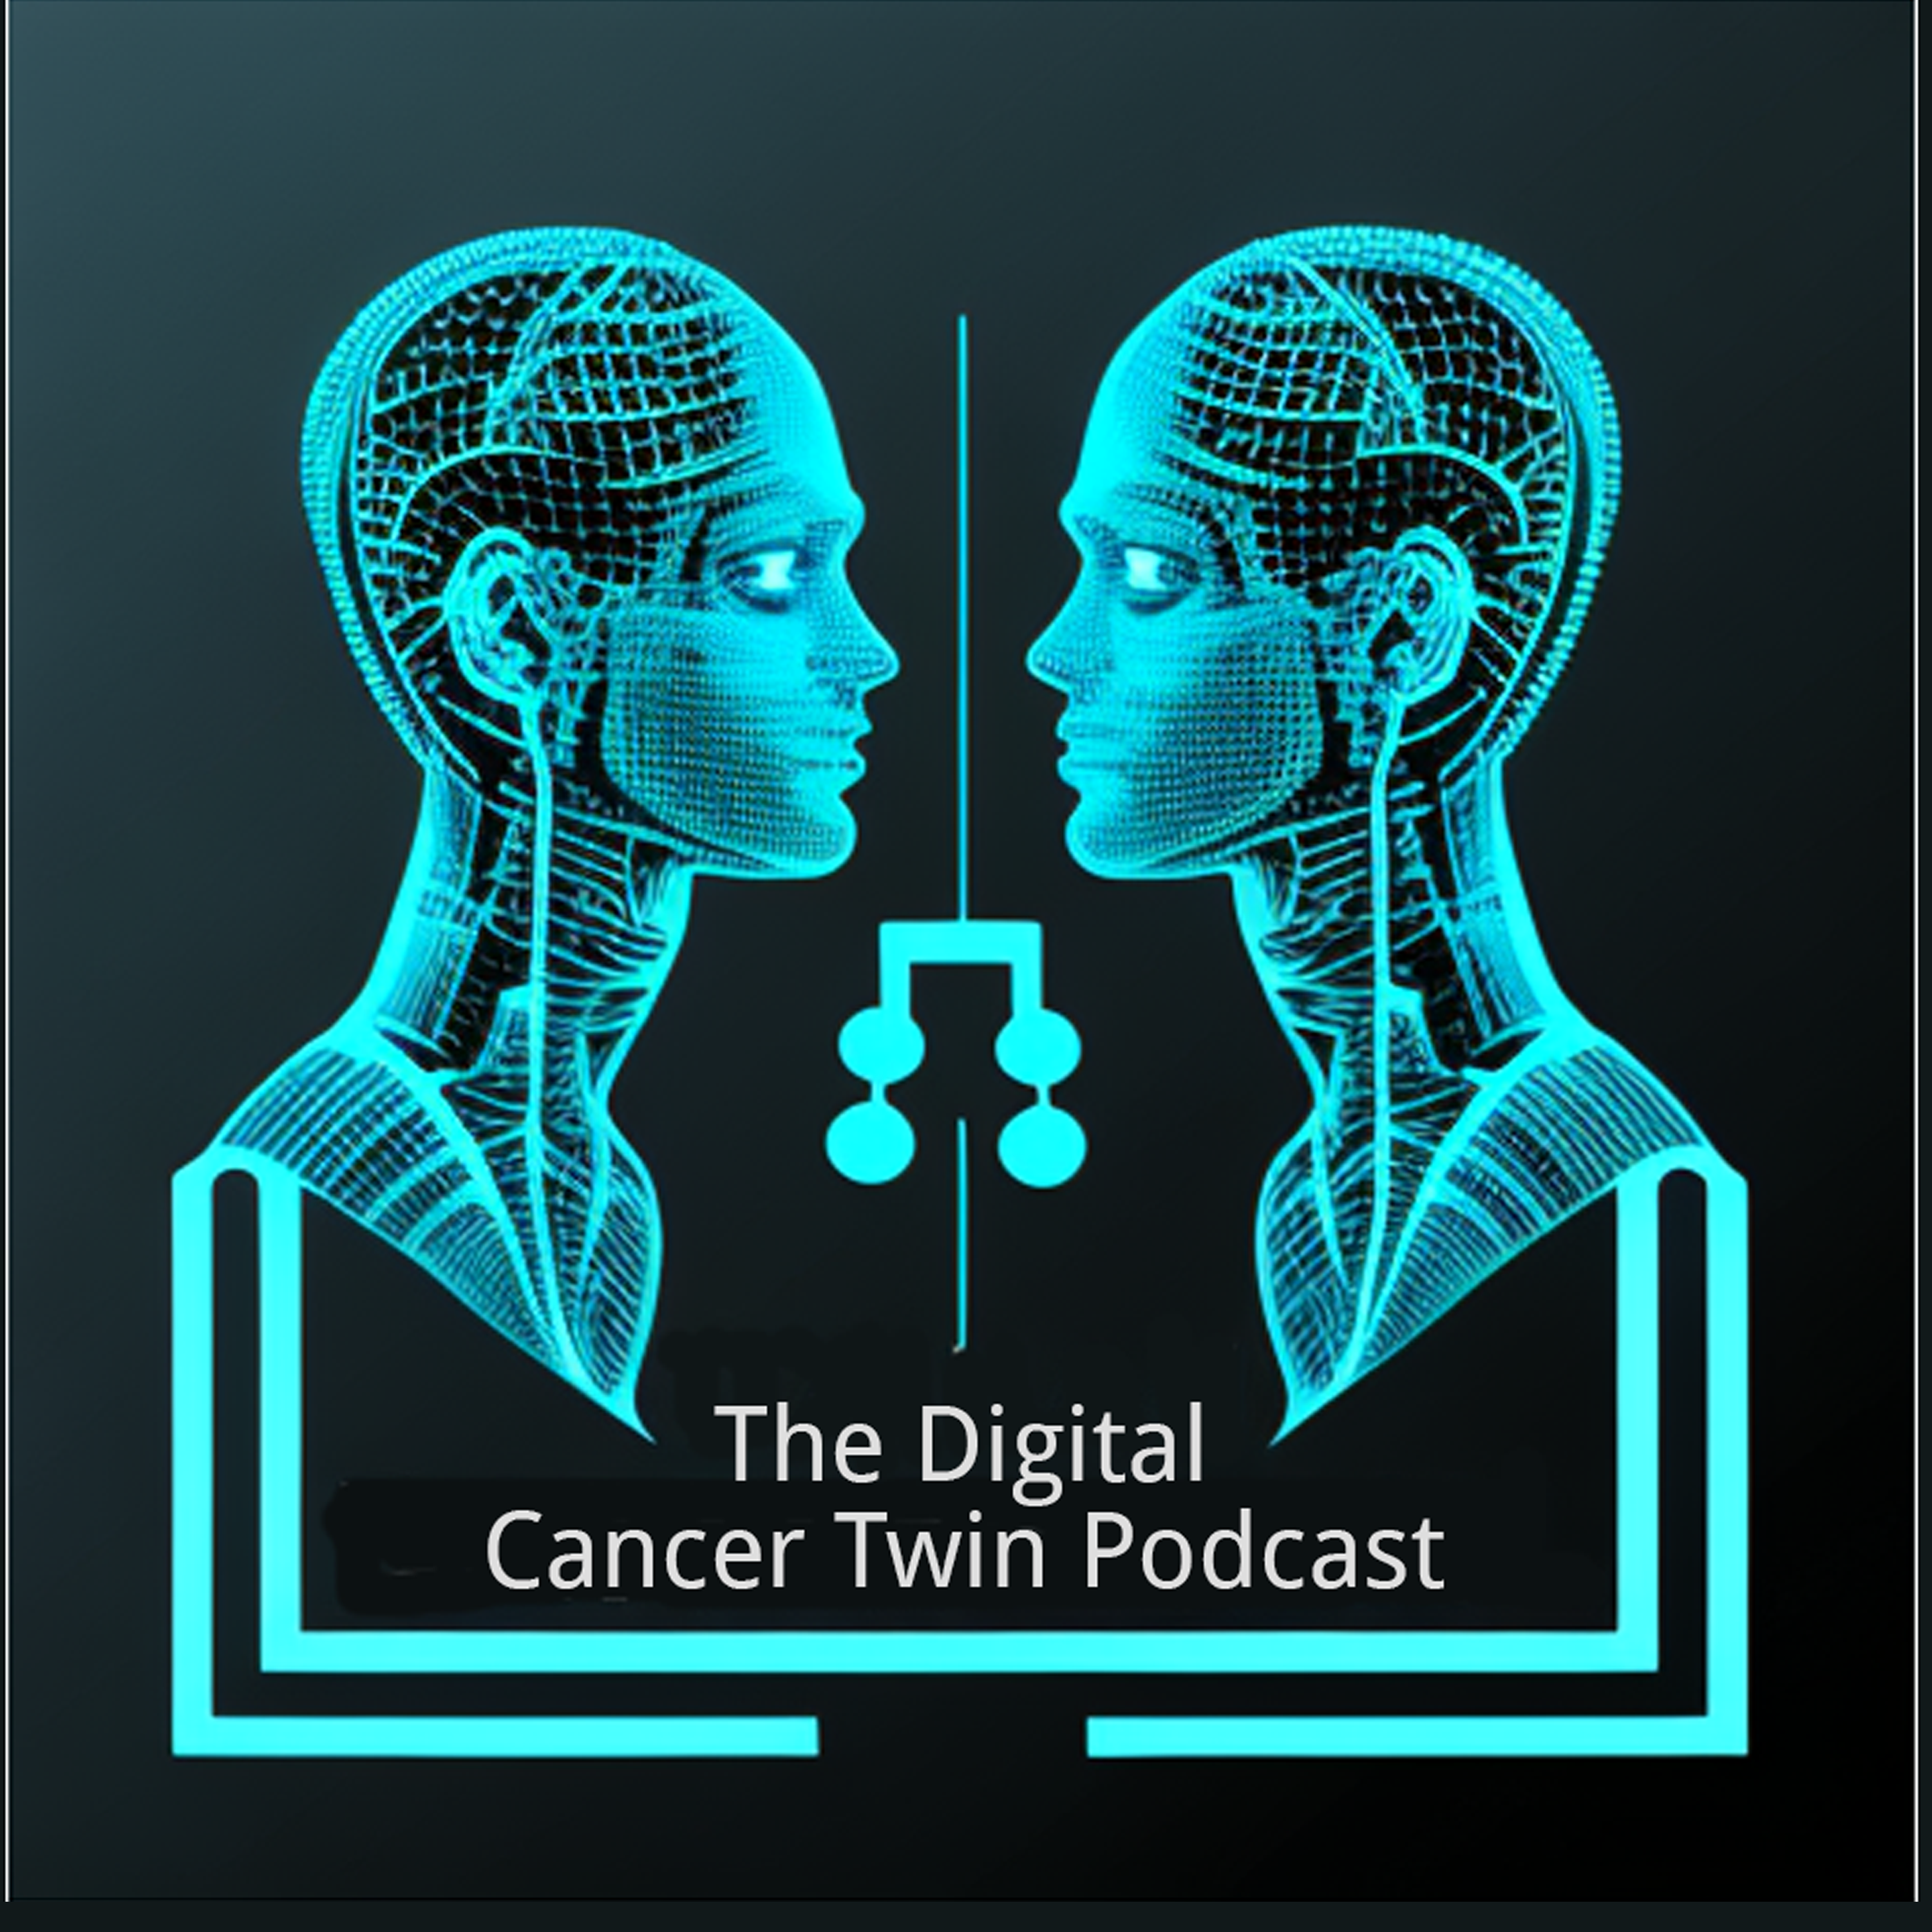 The Digital Cancer Twin Podcast - CFRC Podcast Network